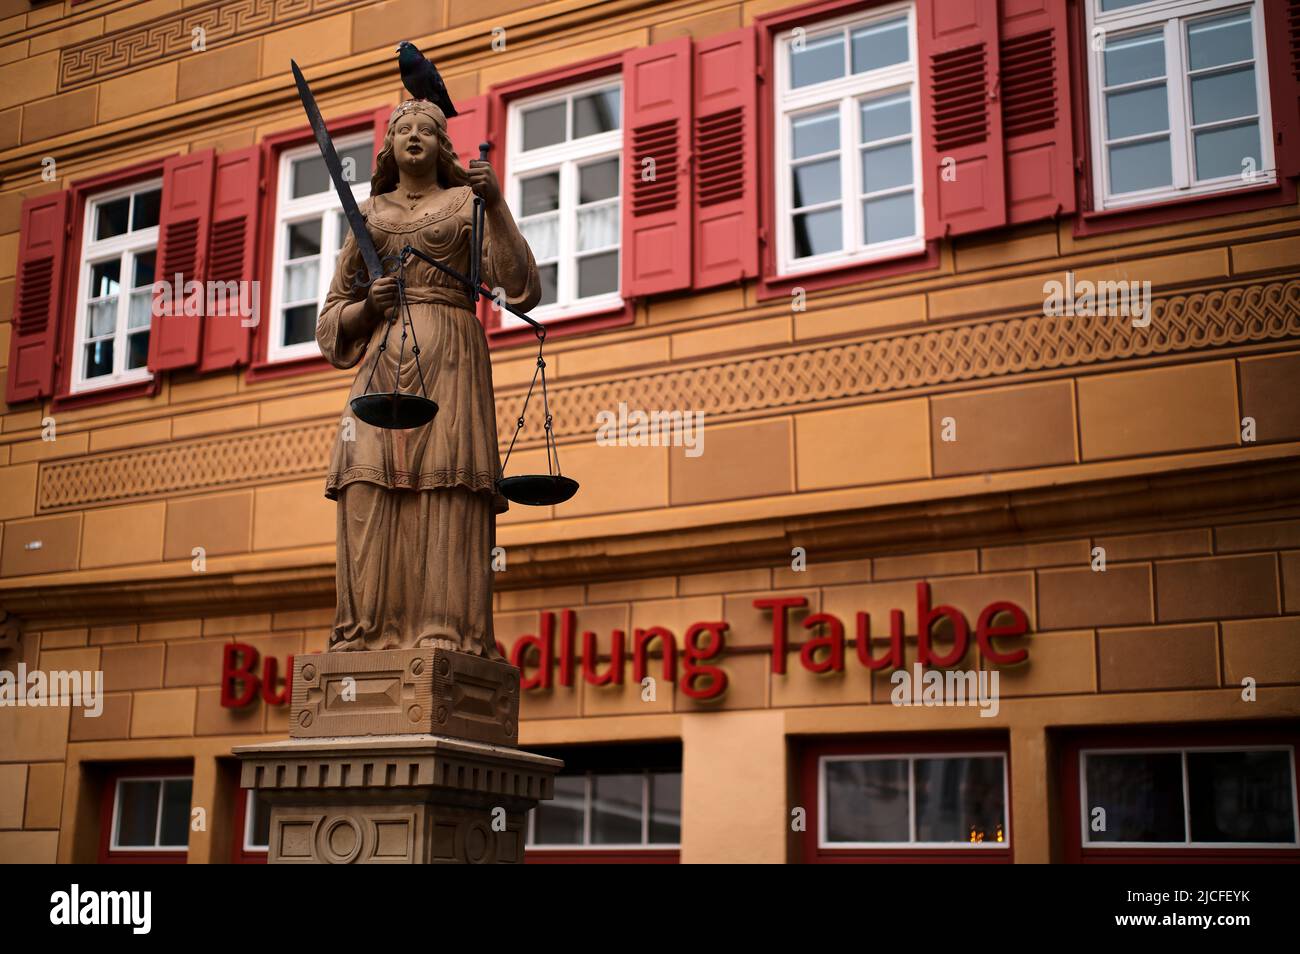 Dove sitting on Justitia, Justitia fountain, behind it bookstore Taube, Waiblingen, Baden-Württemberg, Germany Stock Photo